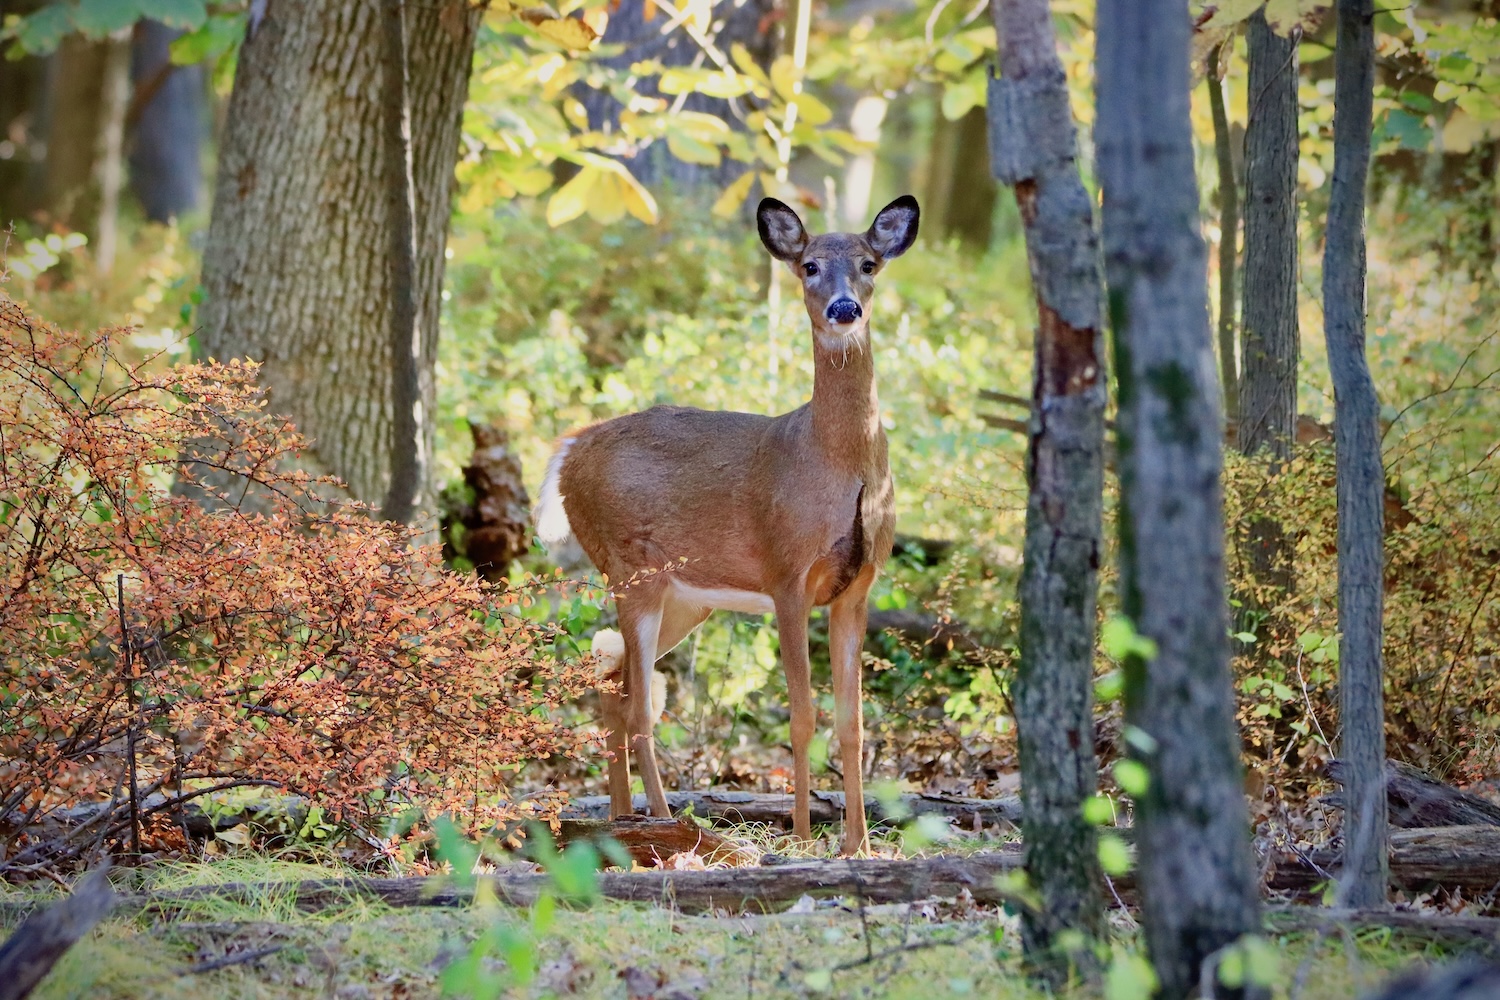 A deer standing in forest surrounded by trees in a forest.